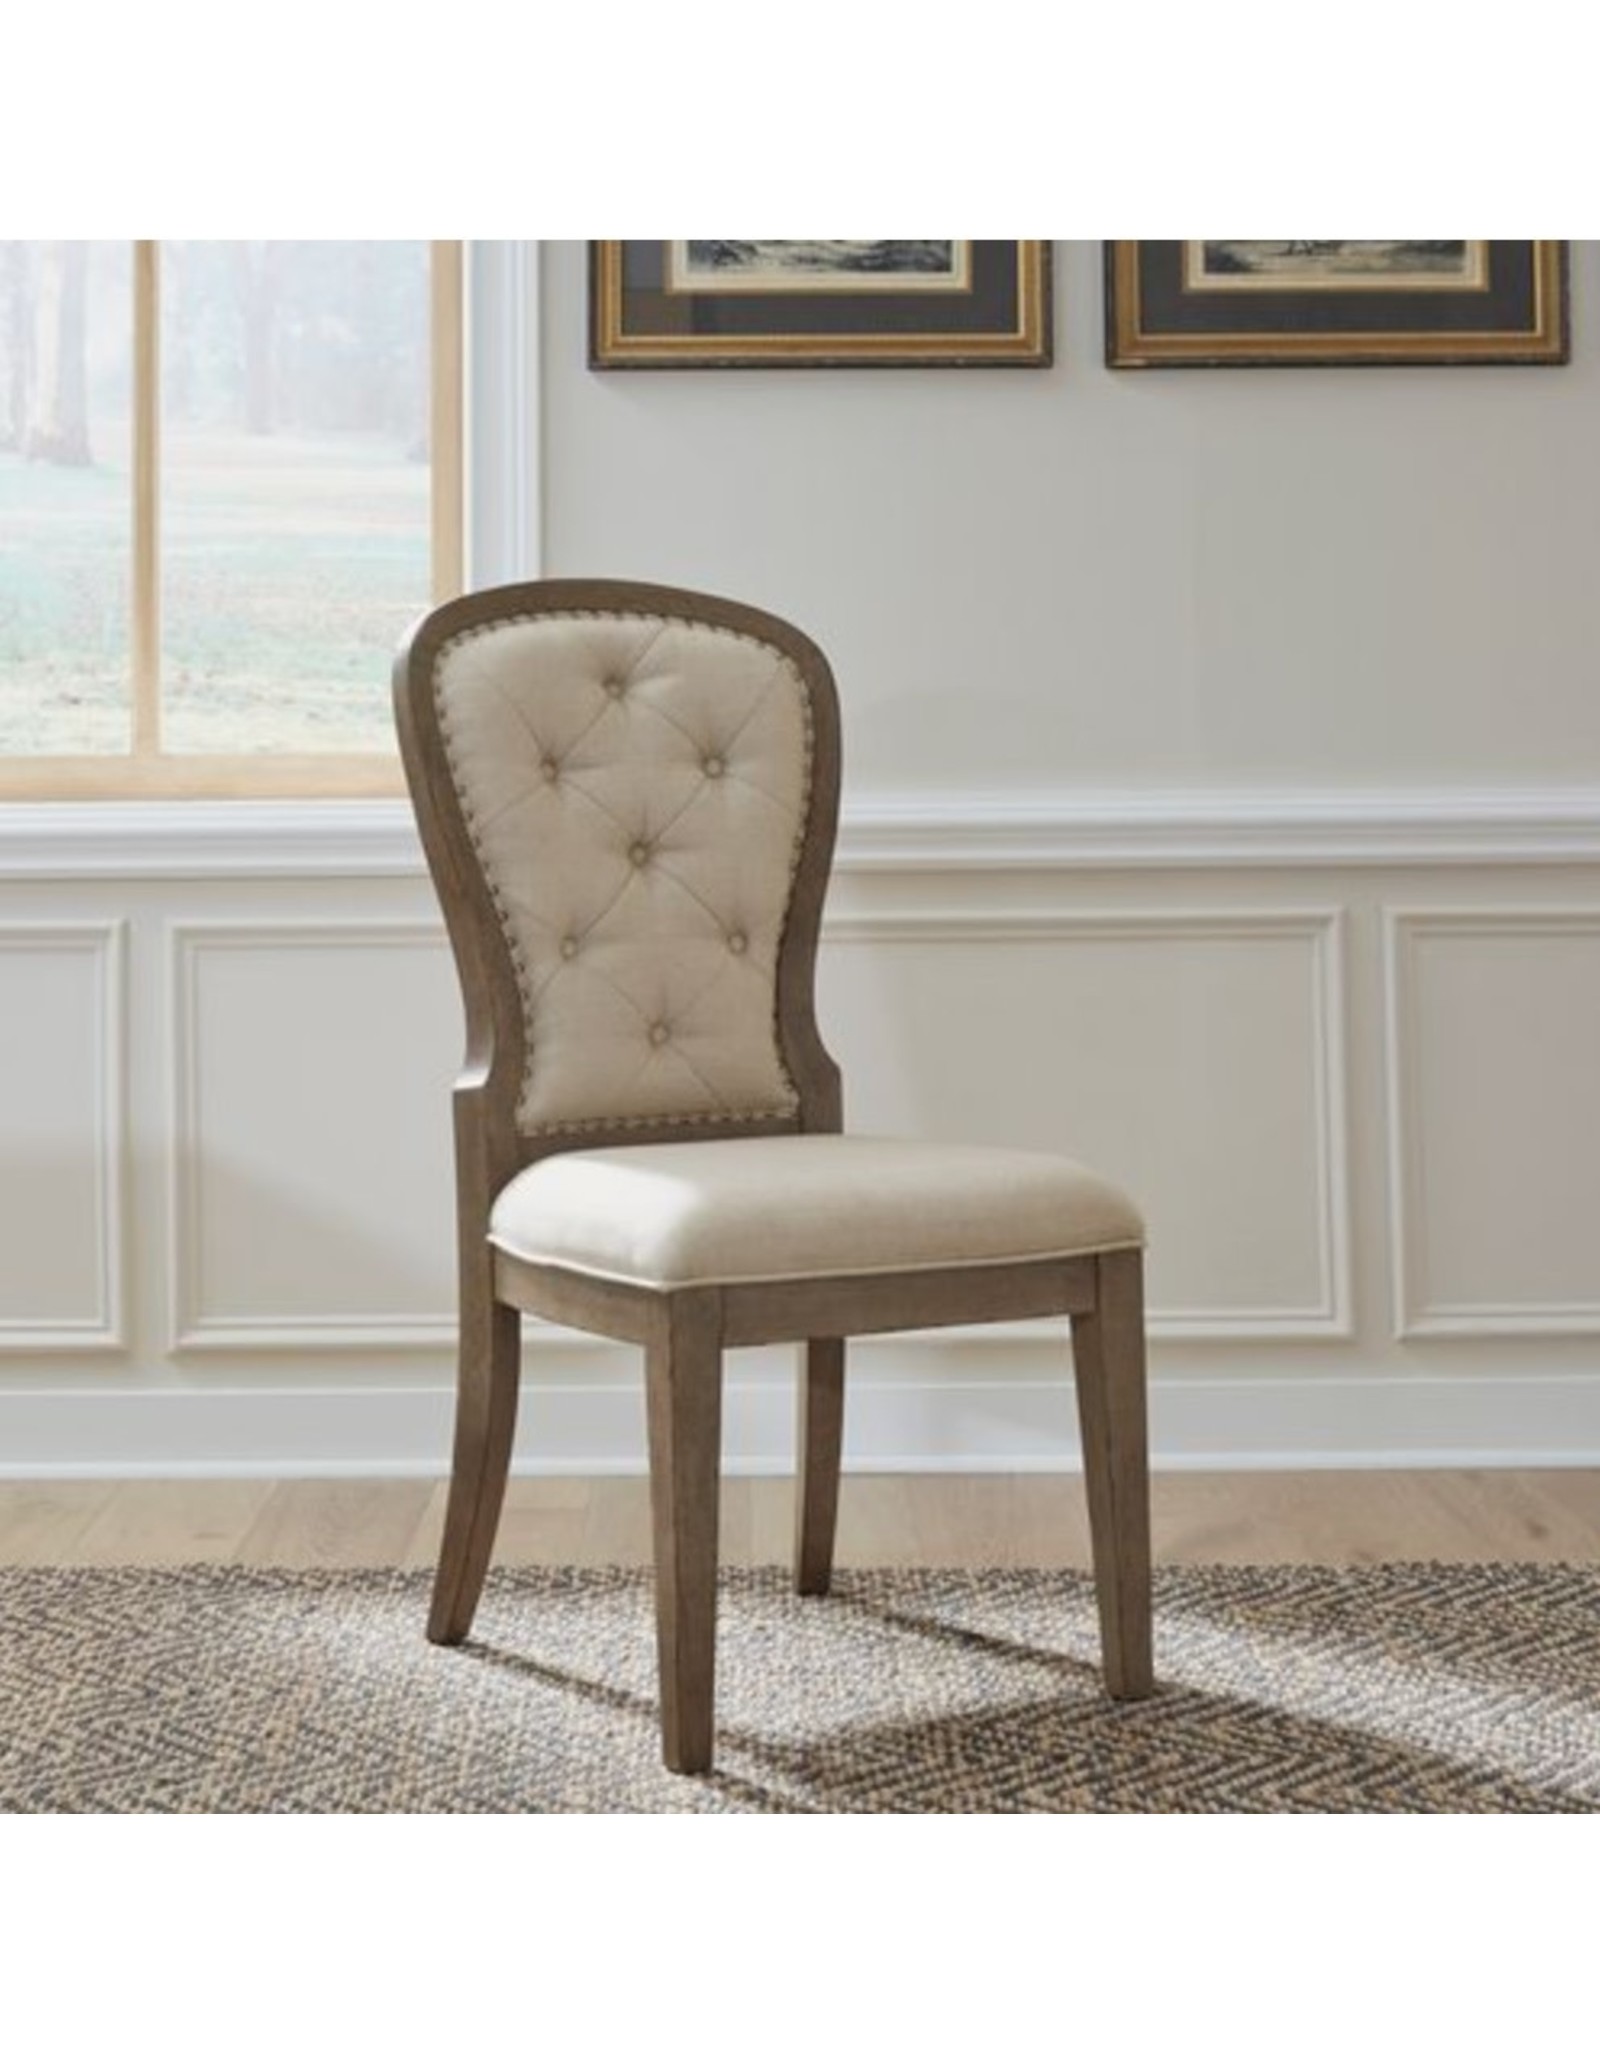 615-C0501S Farmhouse Am Uph Tufted Back Side Chair